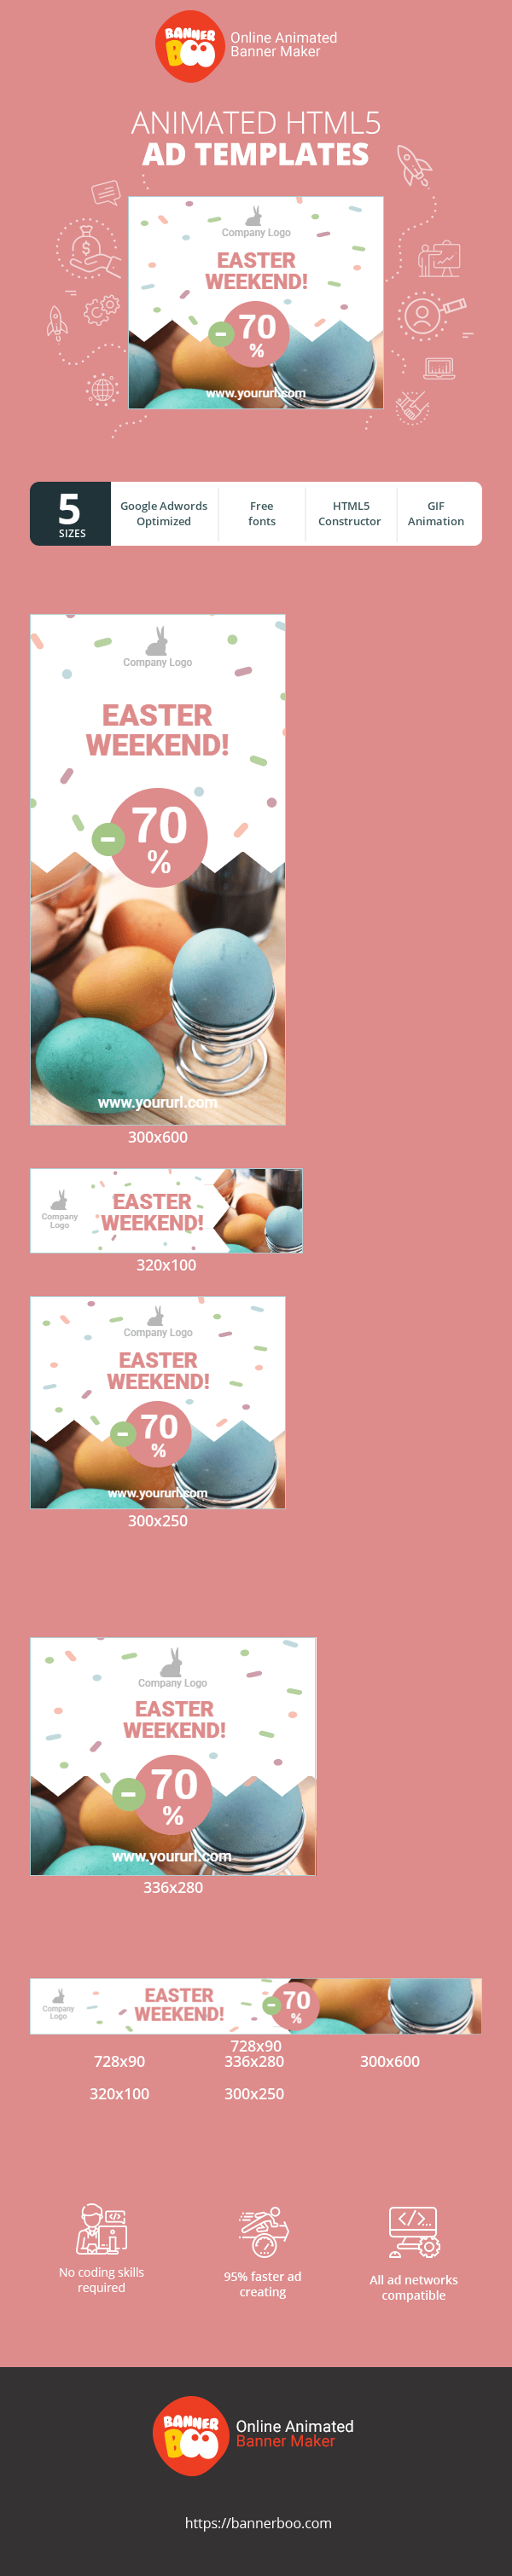 Banner ad template — Easter weekend!